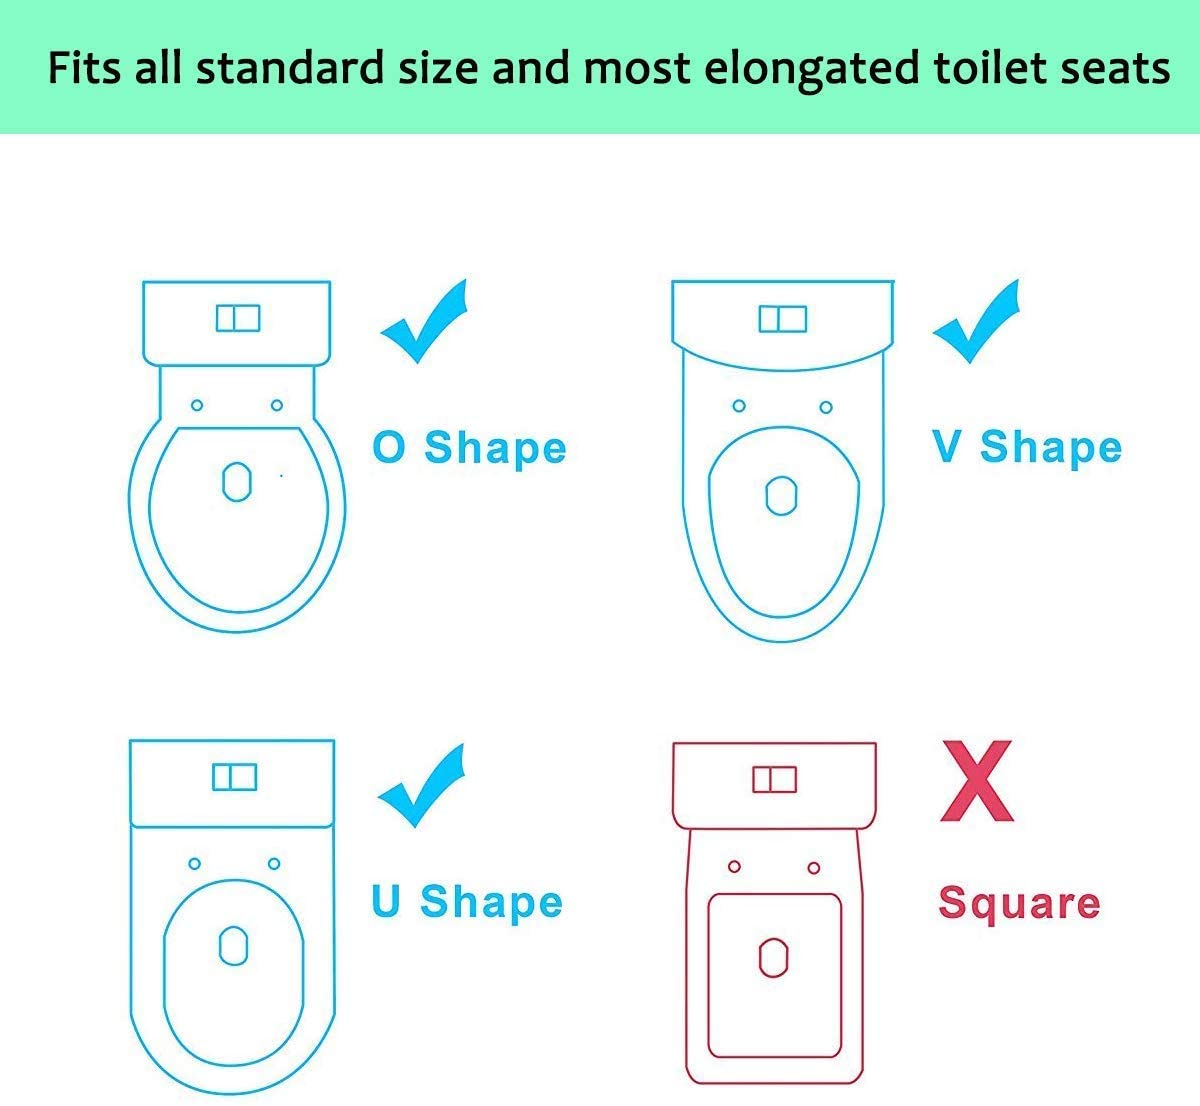 Hukimoyo Potty Training seat, Kids Toilet seat for Western Toilet, Potty Trainer for Baby, Slip Resistant Training seat for Children